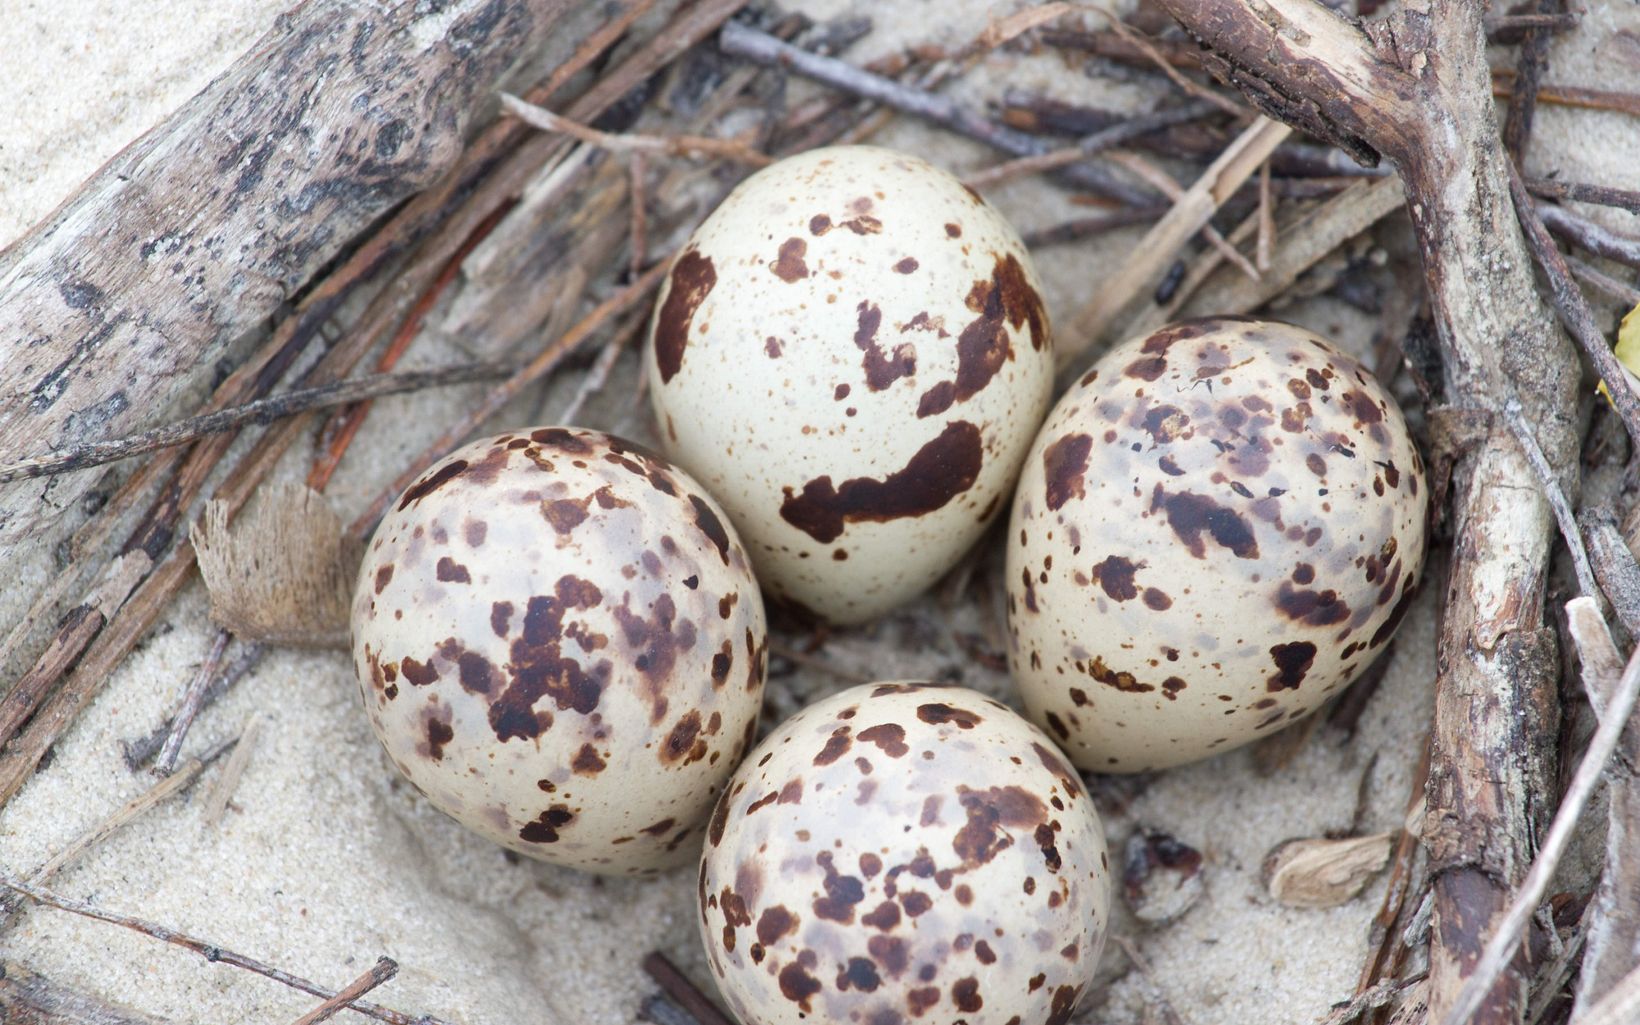 Beach-nesting birds like piping plovers and least terns build nests, called scrapes, in depressions in the sand. 